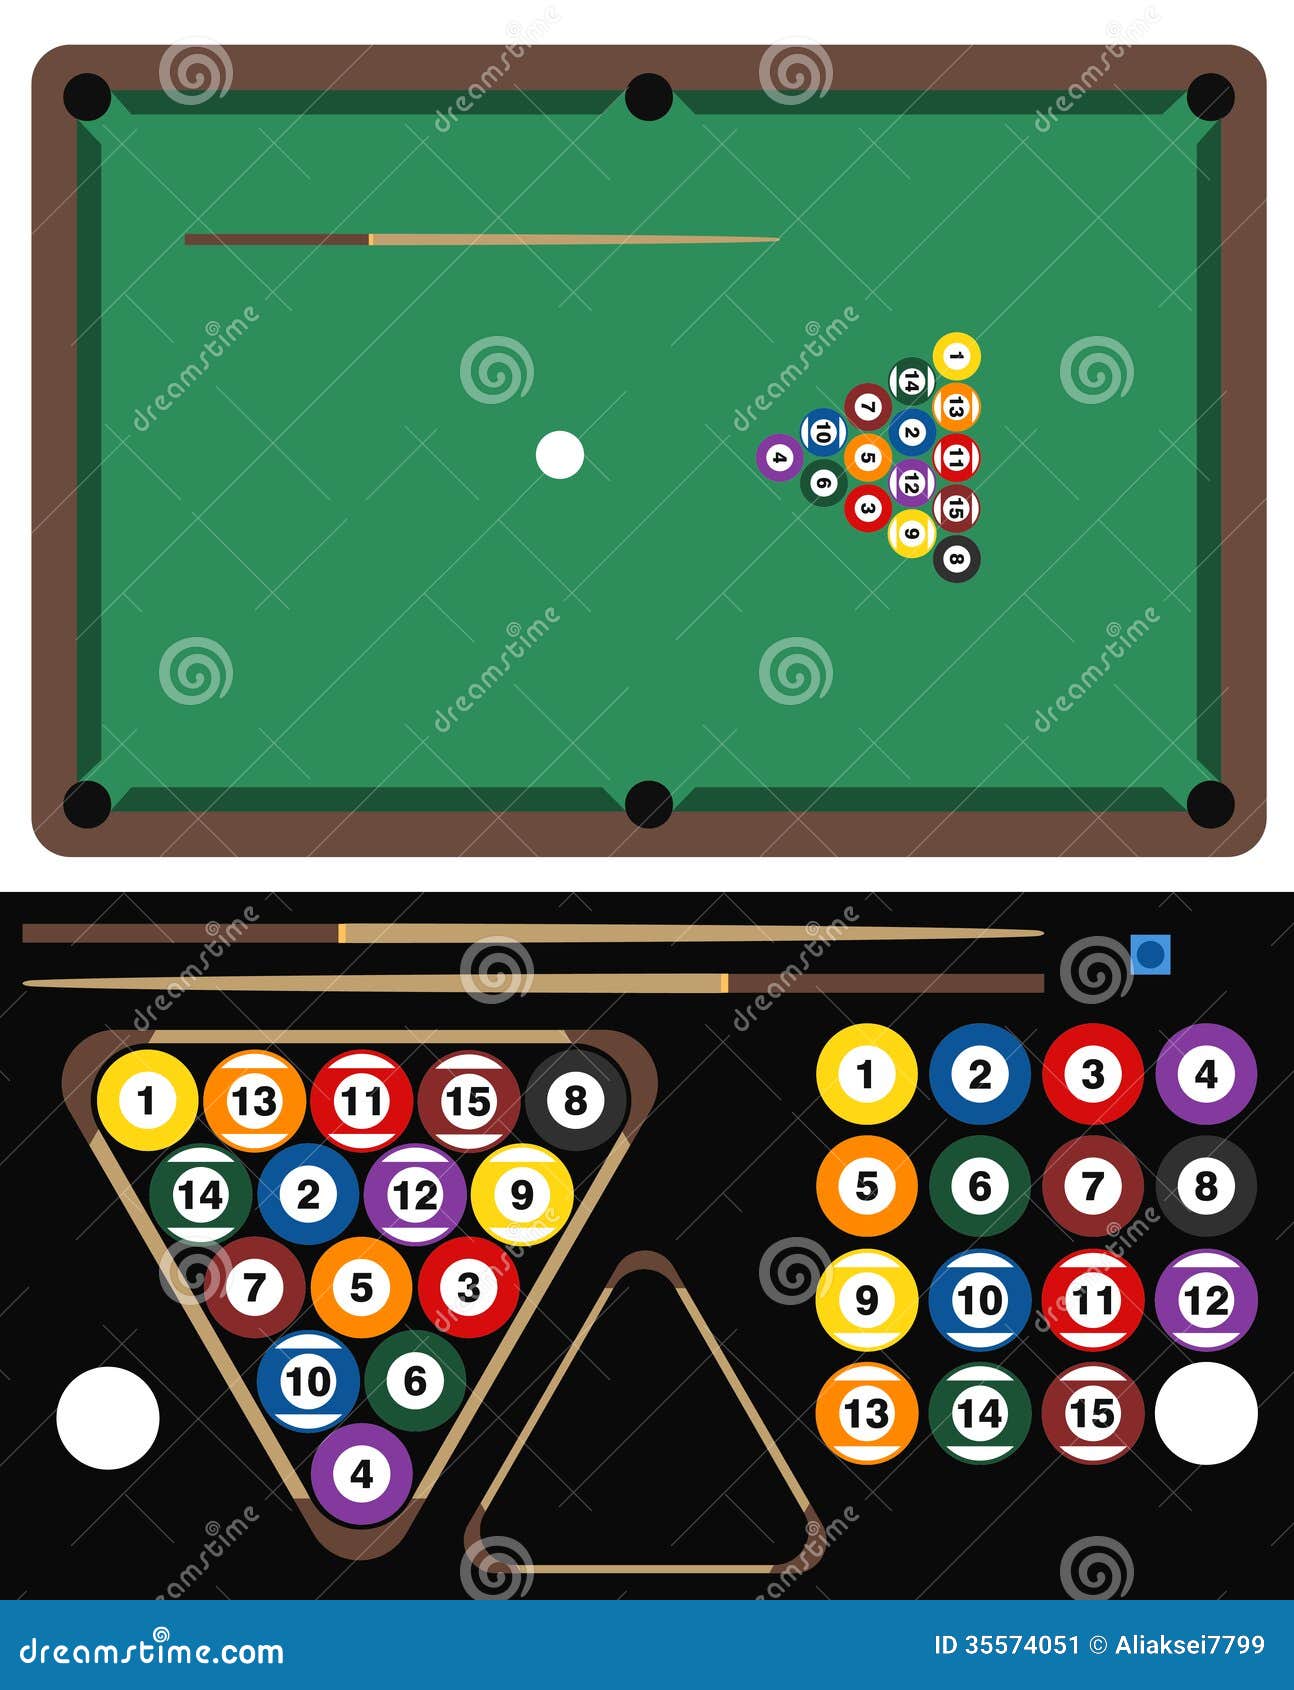 Pool table top view. Online billiard game green vector background